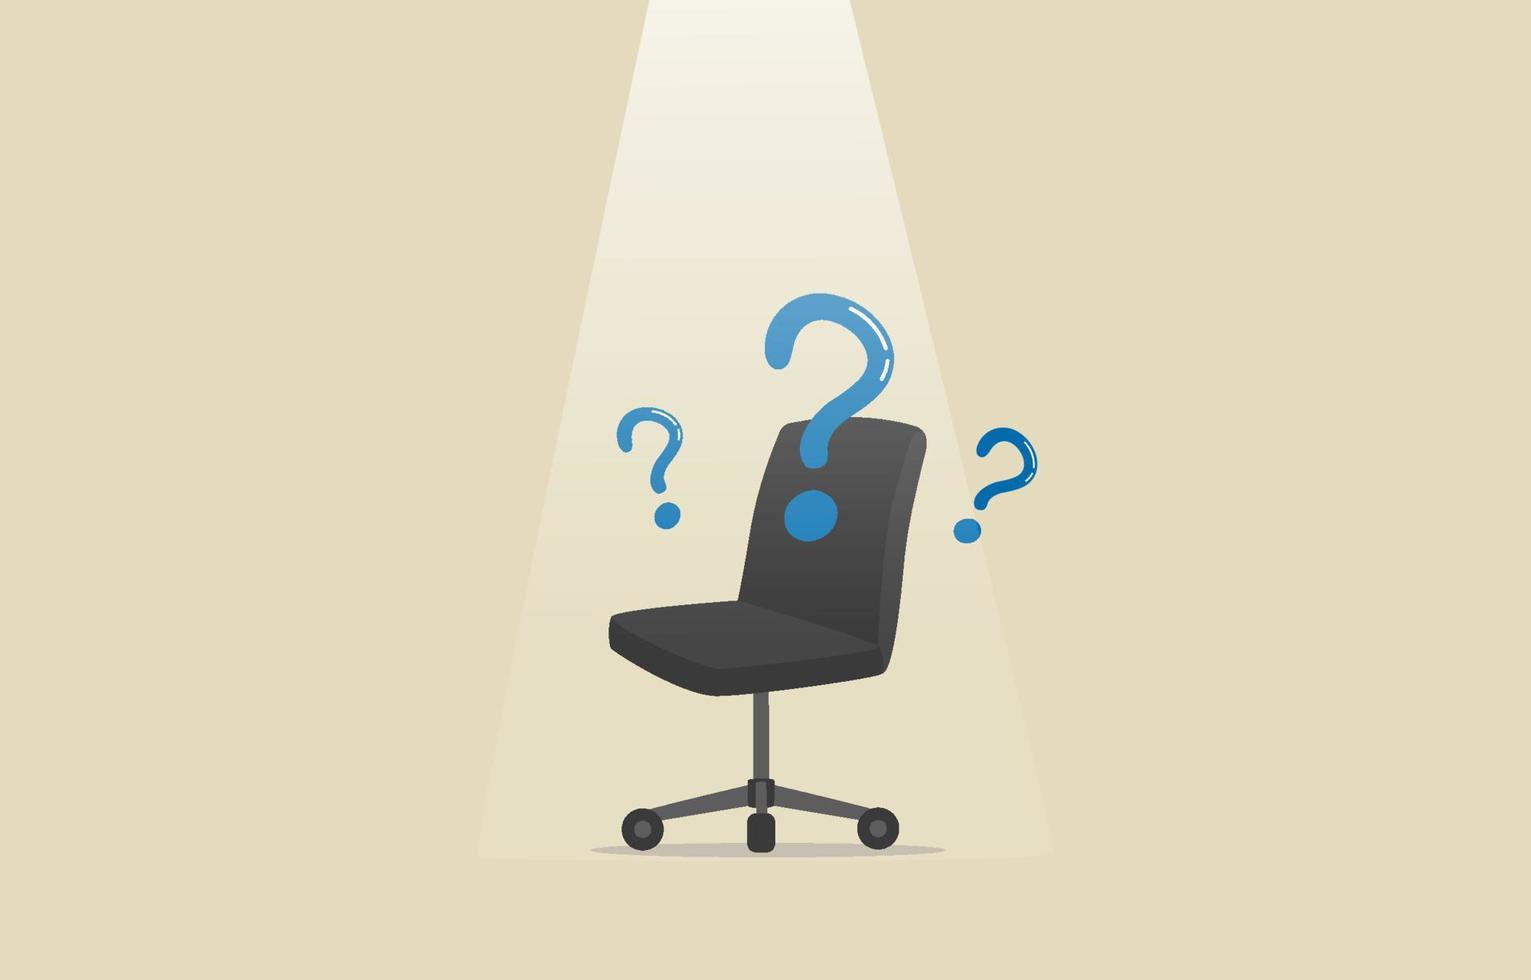 Recruitment. hiring. Job application questions. Post resumes. Office chair and questions. illustration vector